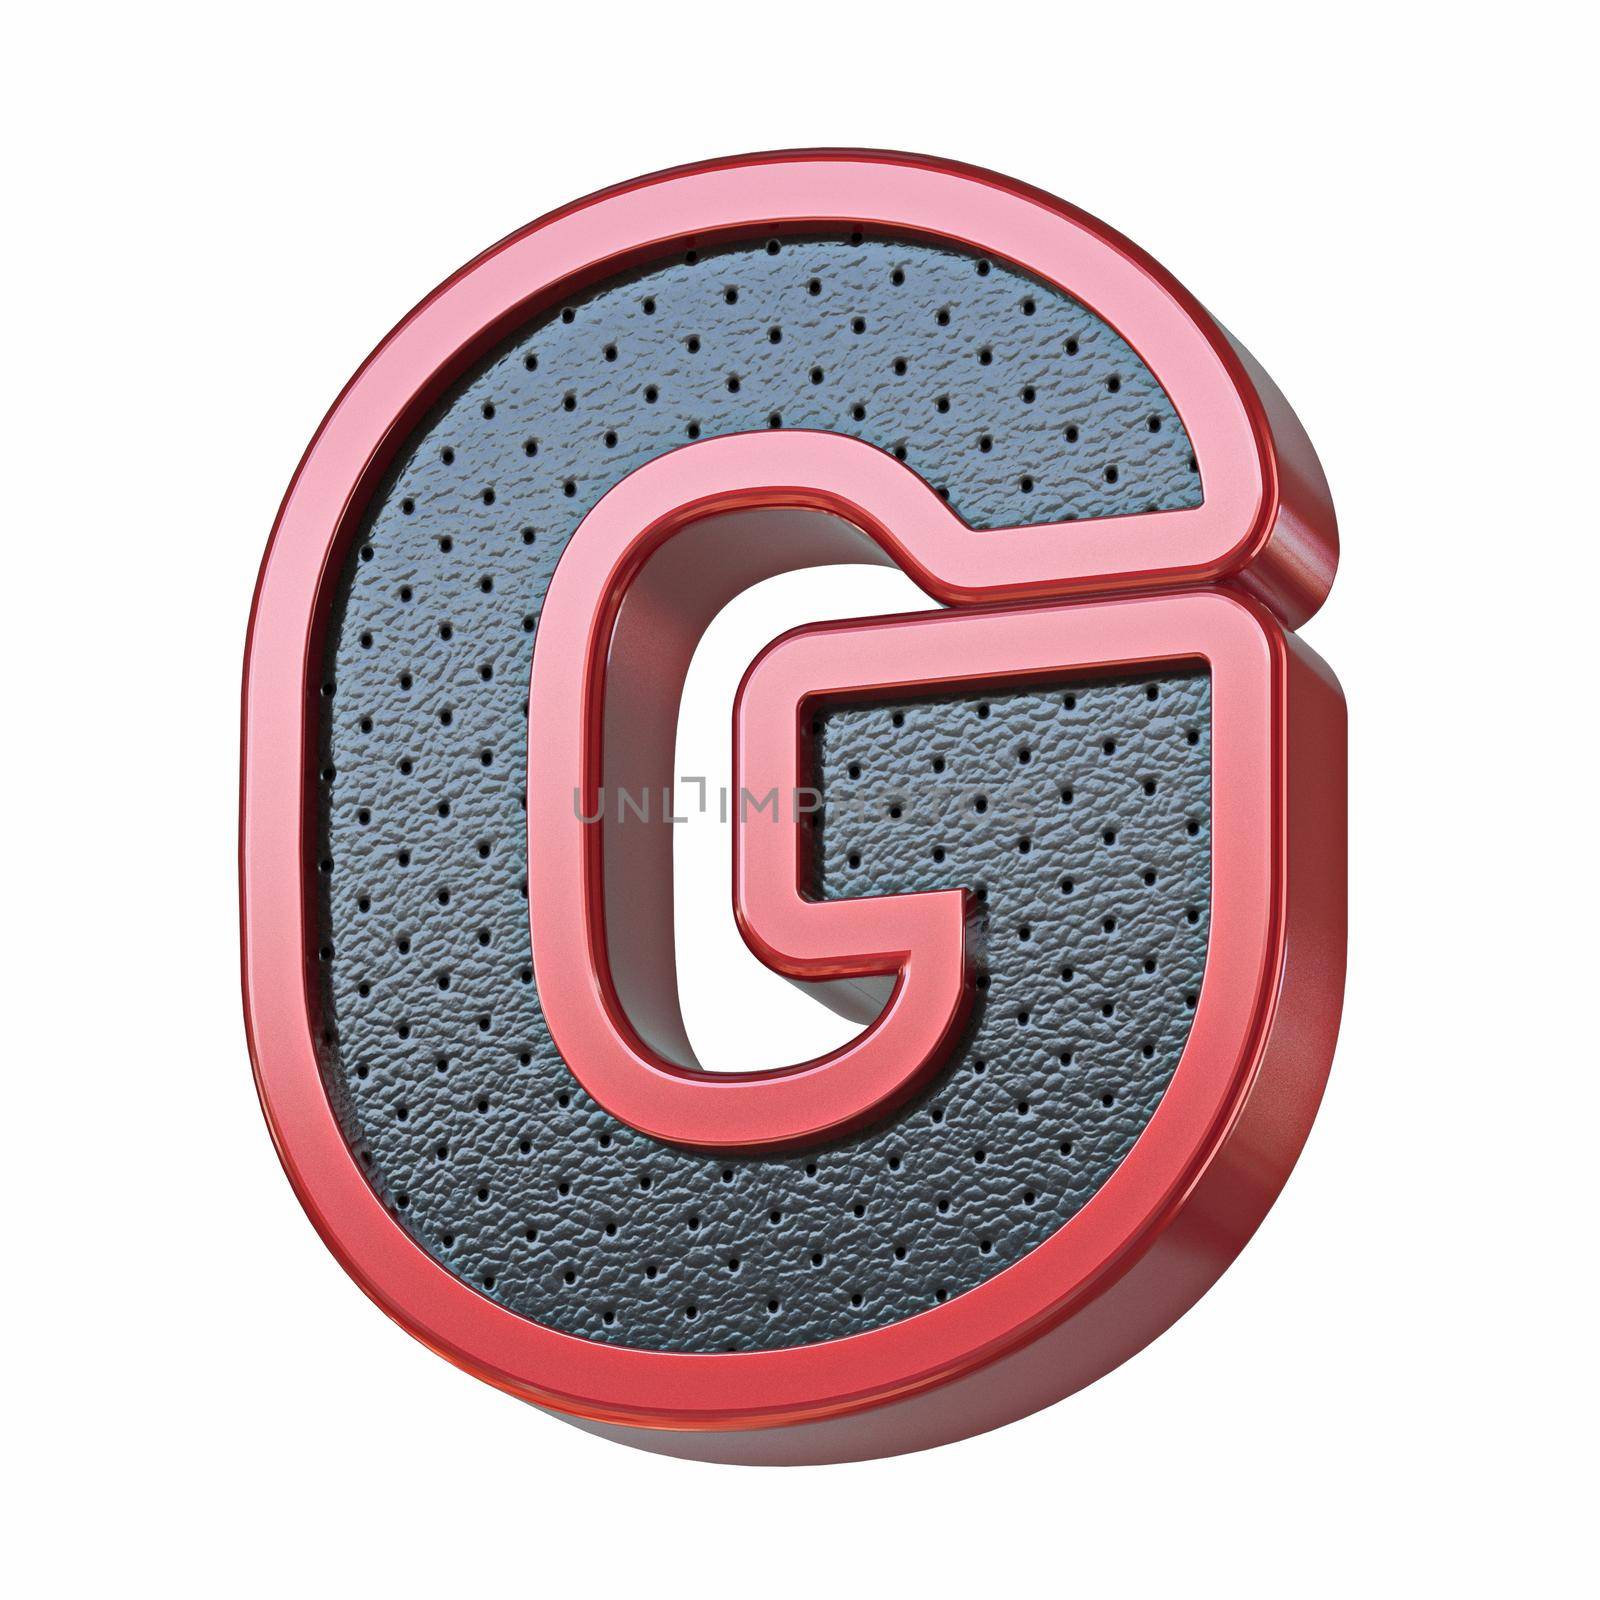 Red shinny metal and black leather font Letter G 3D render illustration isolated on white background